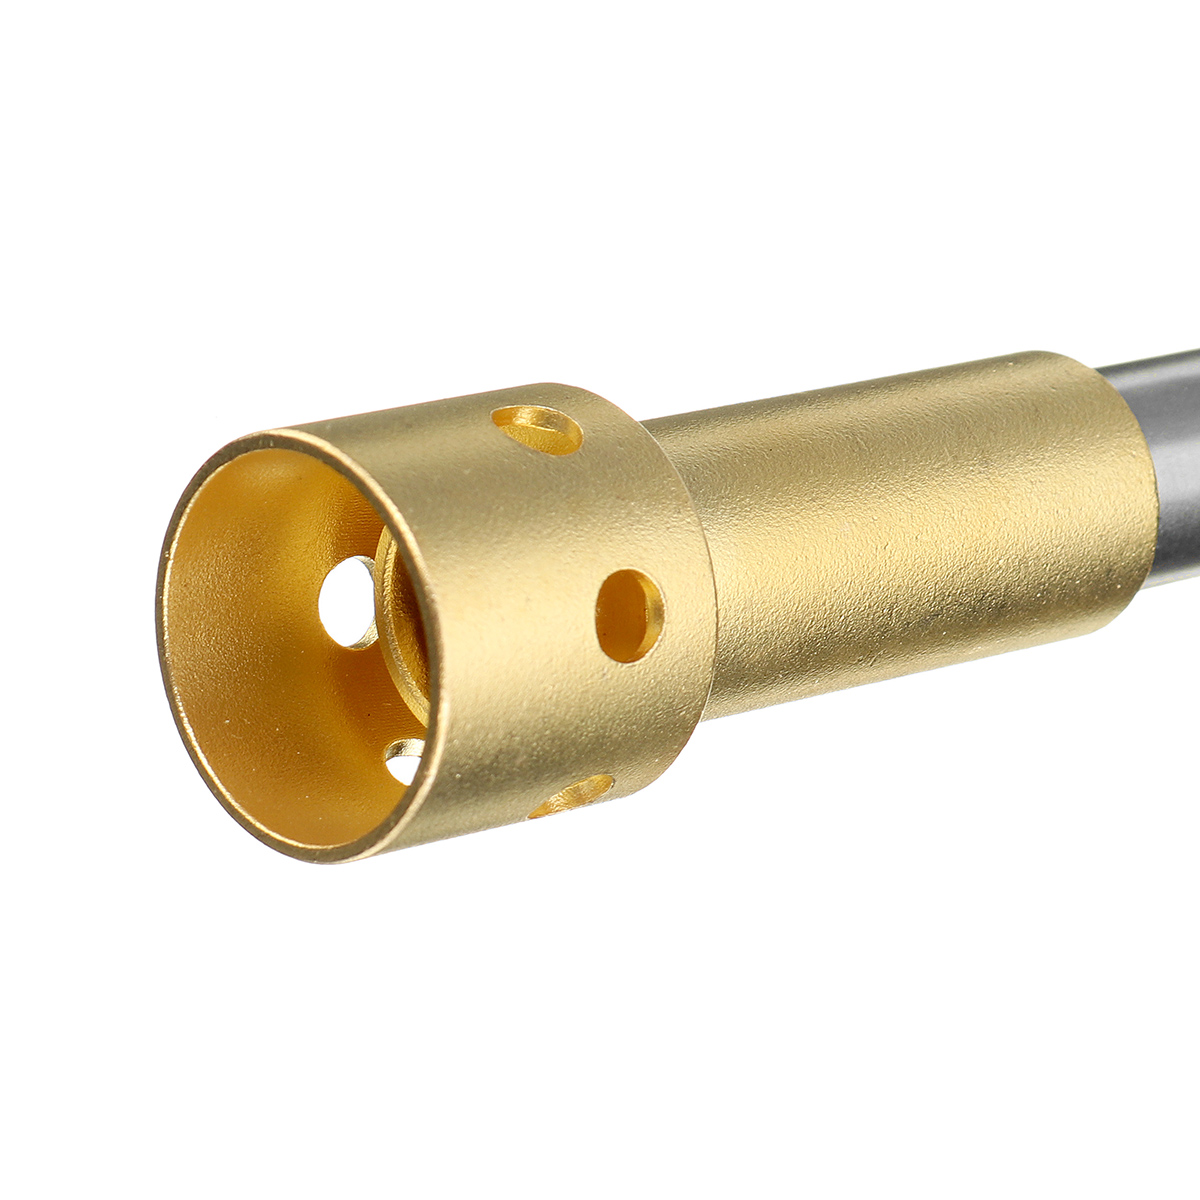 TS8000-Type-High-Temperature-Brass-Mapp-Gas-Torch-Propane-Welding-Pipe-With-a-Replaceable-Brass-Weld-1717065-10